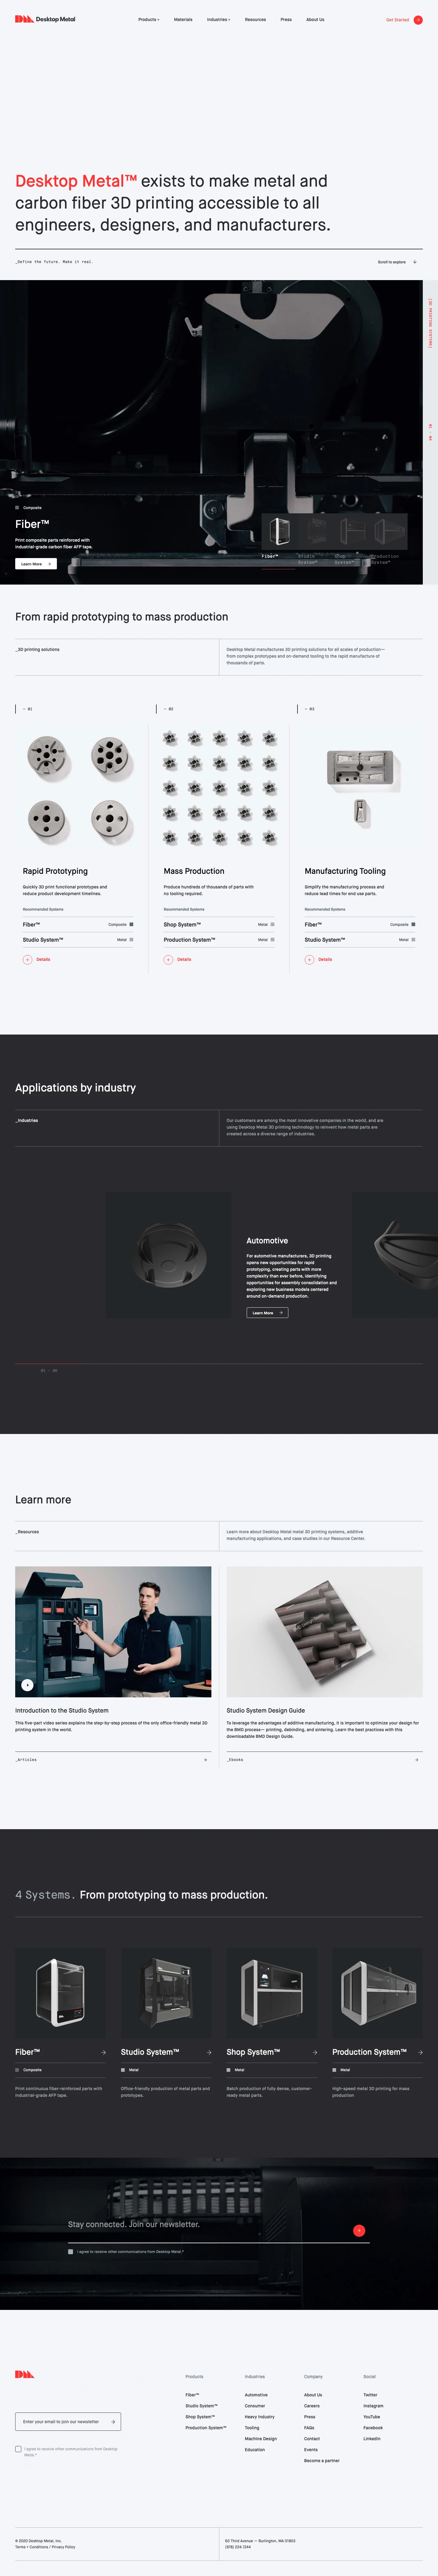 Desktop Metal Landing Page Example: Desktop Metal exists to make metal and carbon fiber 3D printing accessible to all engineers, designers, and manufacturers.